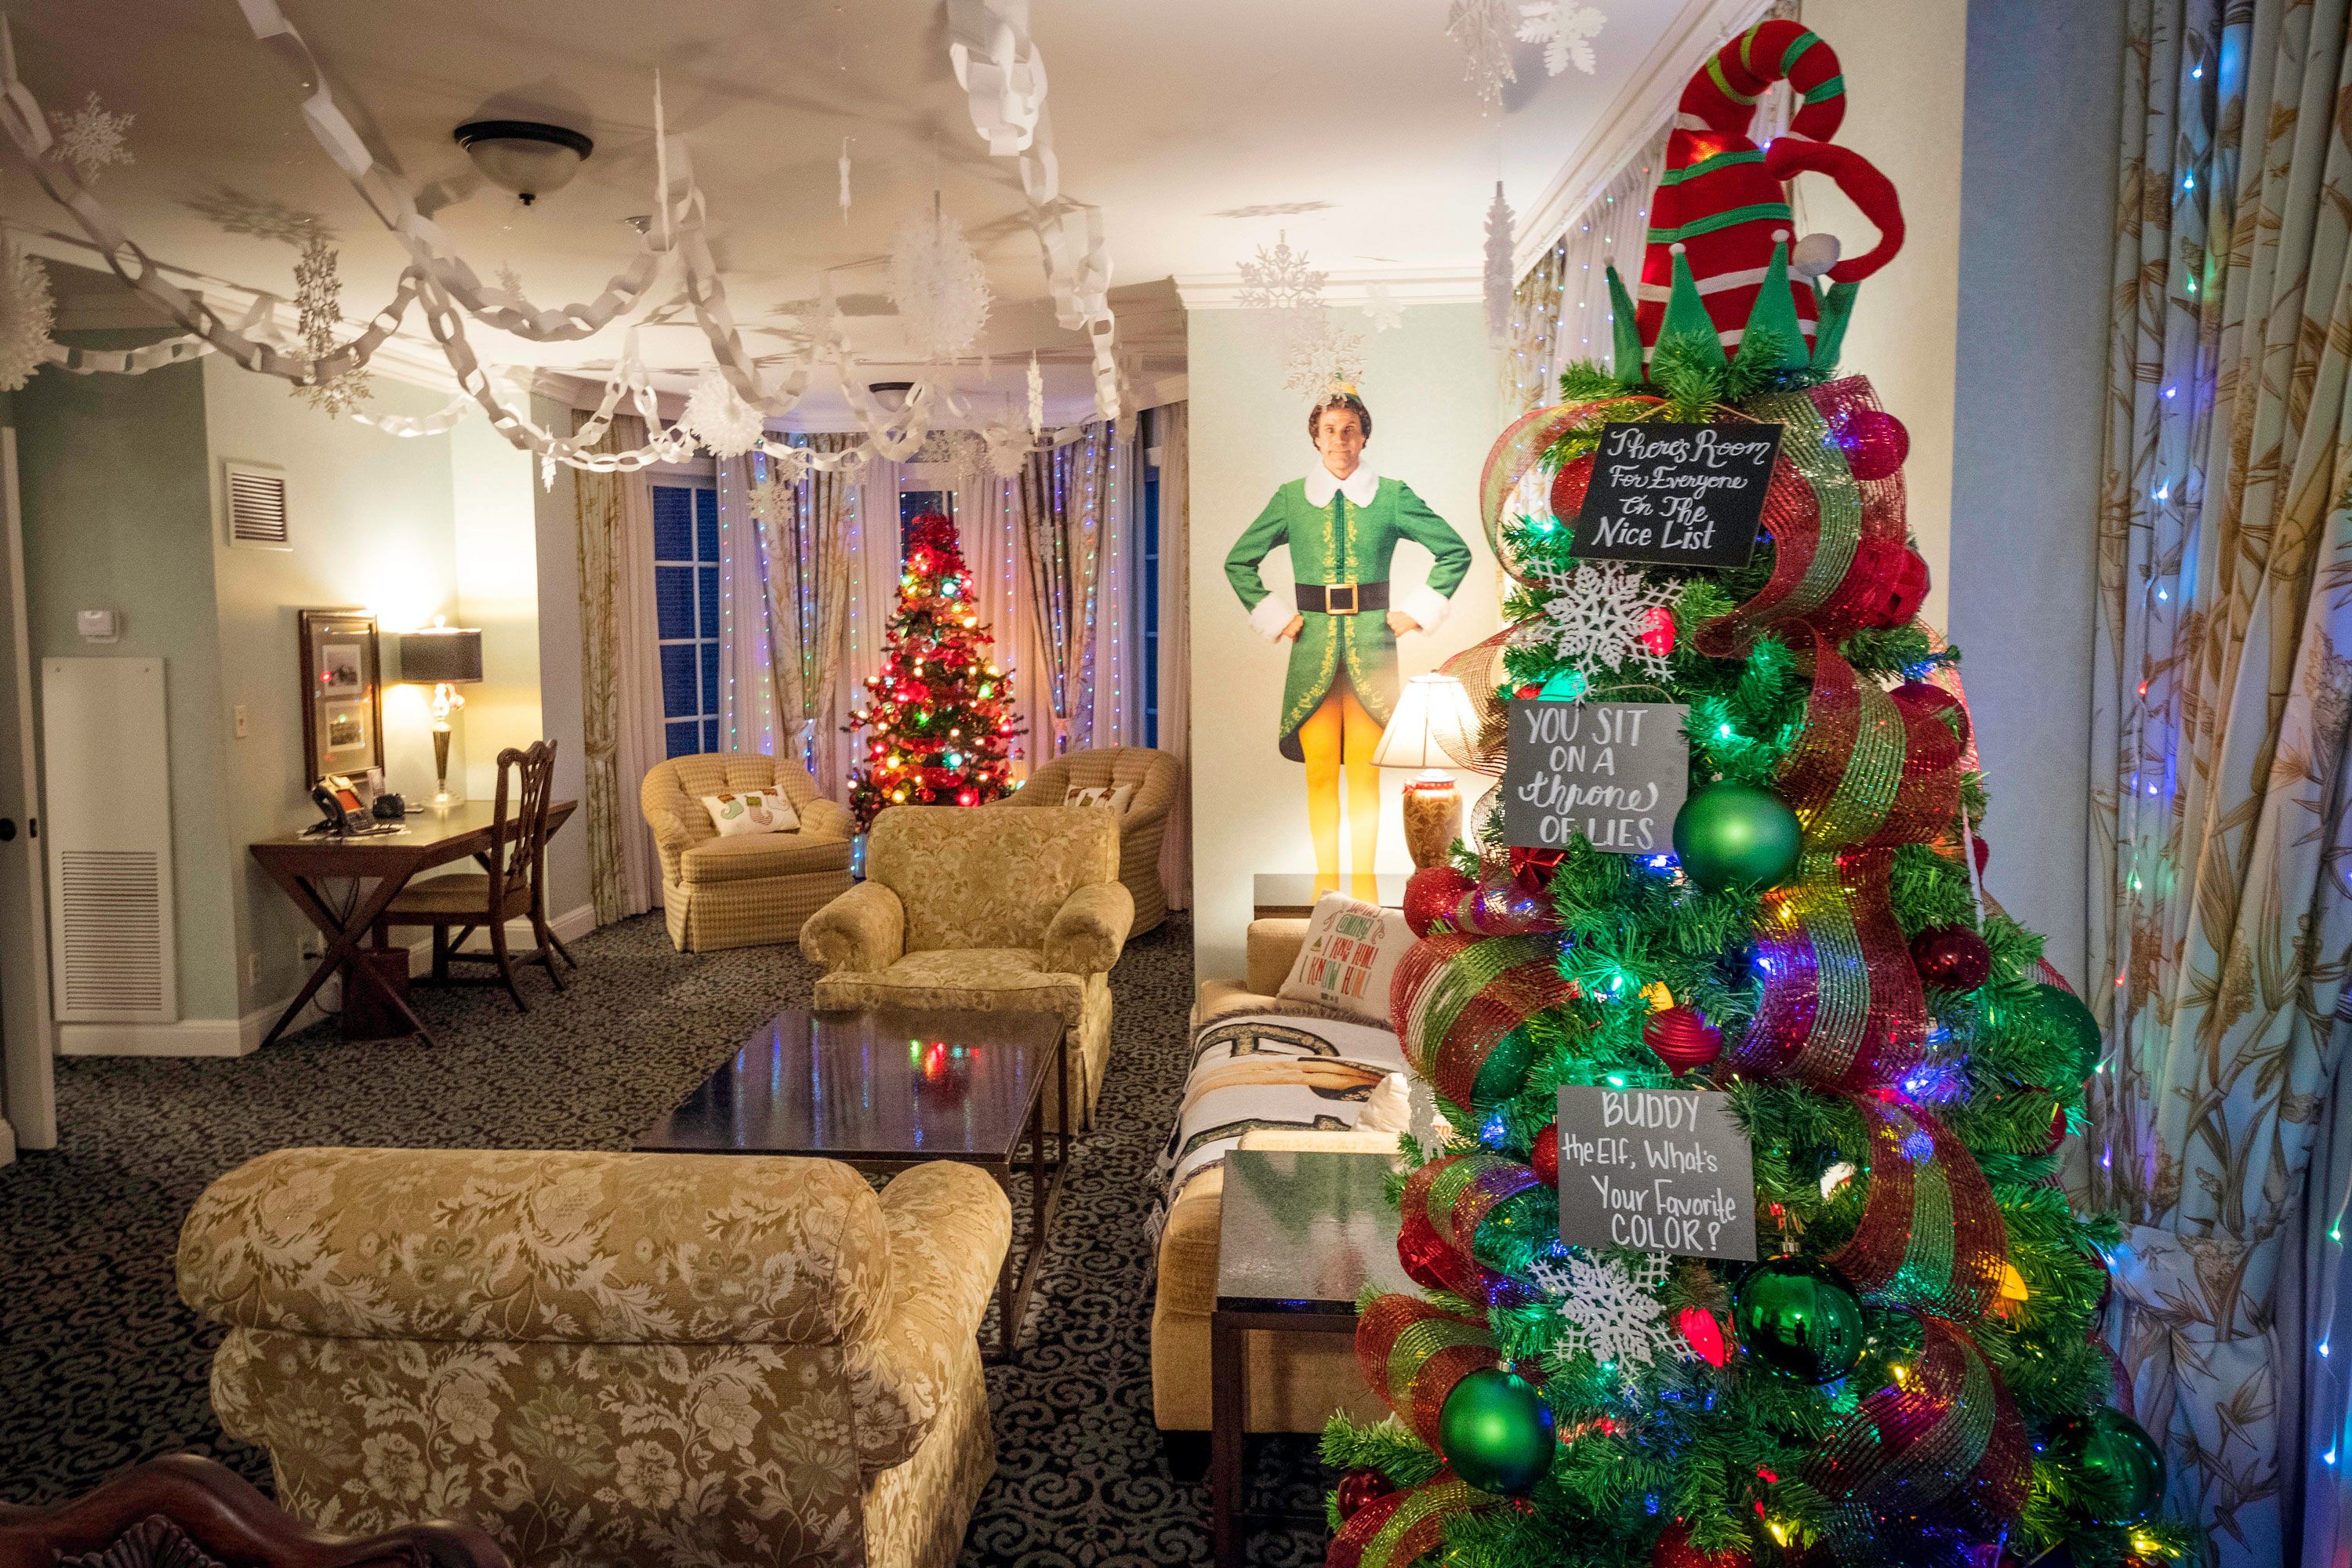 Elf' fans can stay in a hotel suite inspired by Buddy the Elf